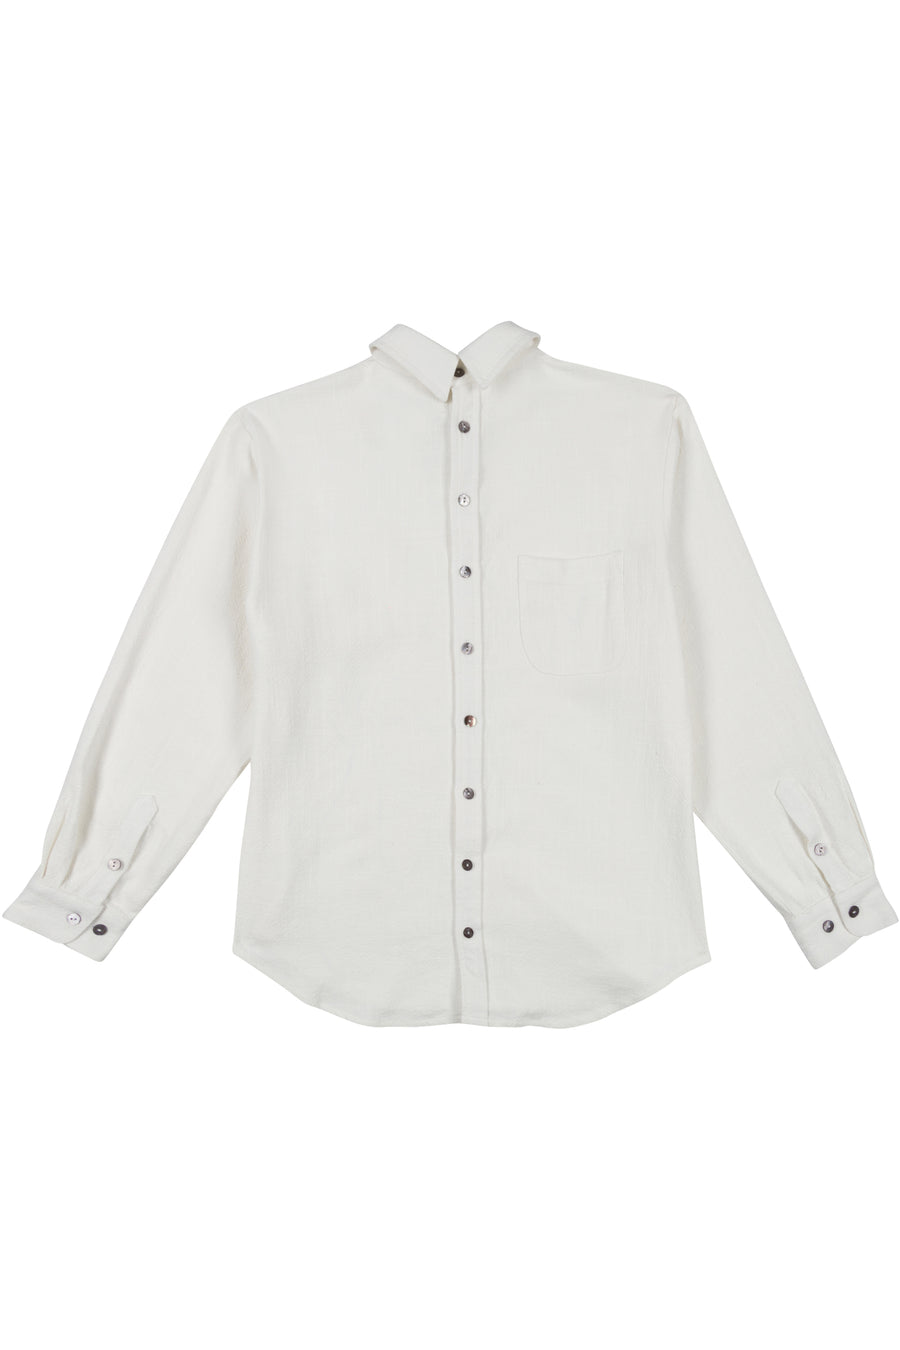 Front and Back Linen Shirt Jacket White